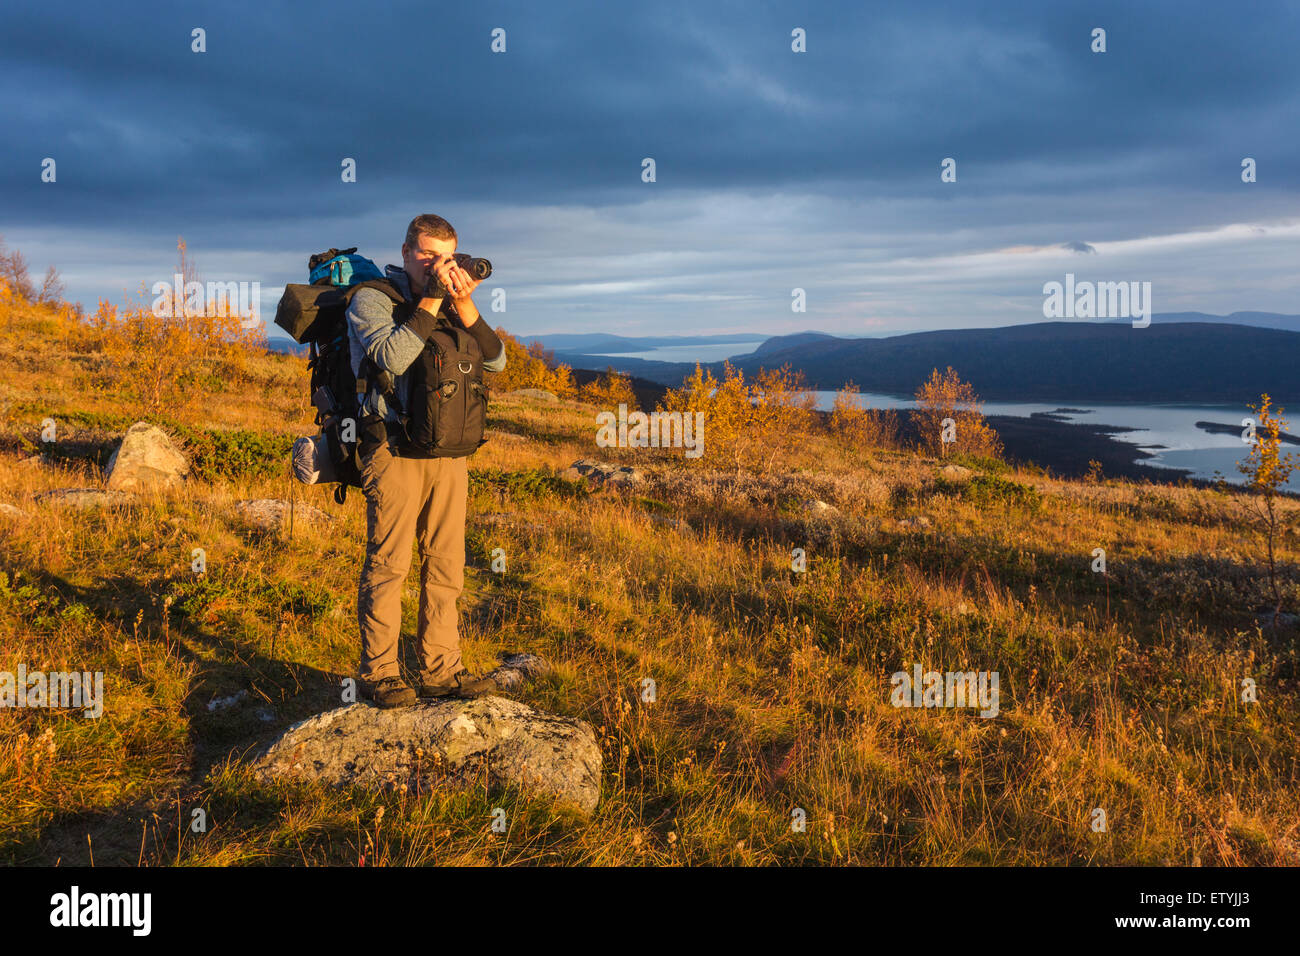 White man with backpack taking photo standing on mountain in autumn season in Sweden, Swedish lapland Stock Photo